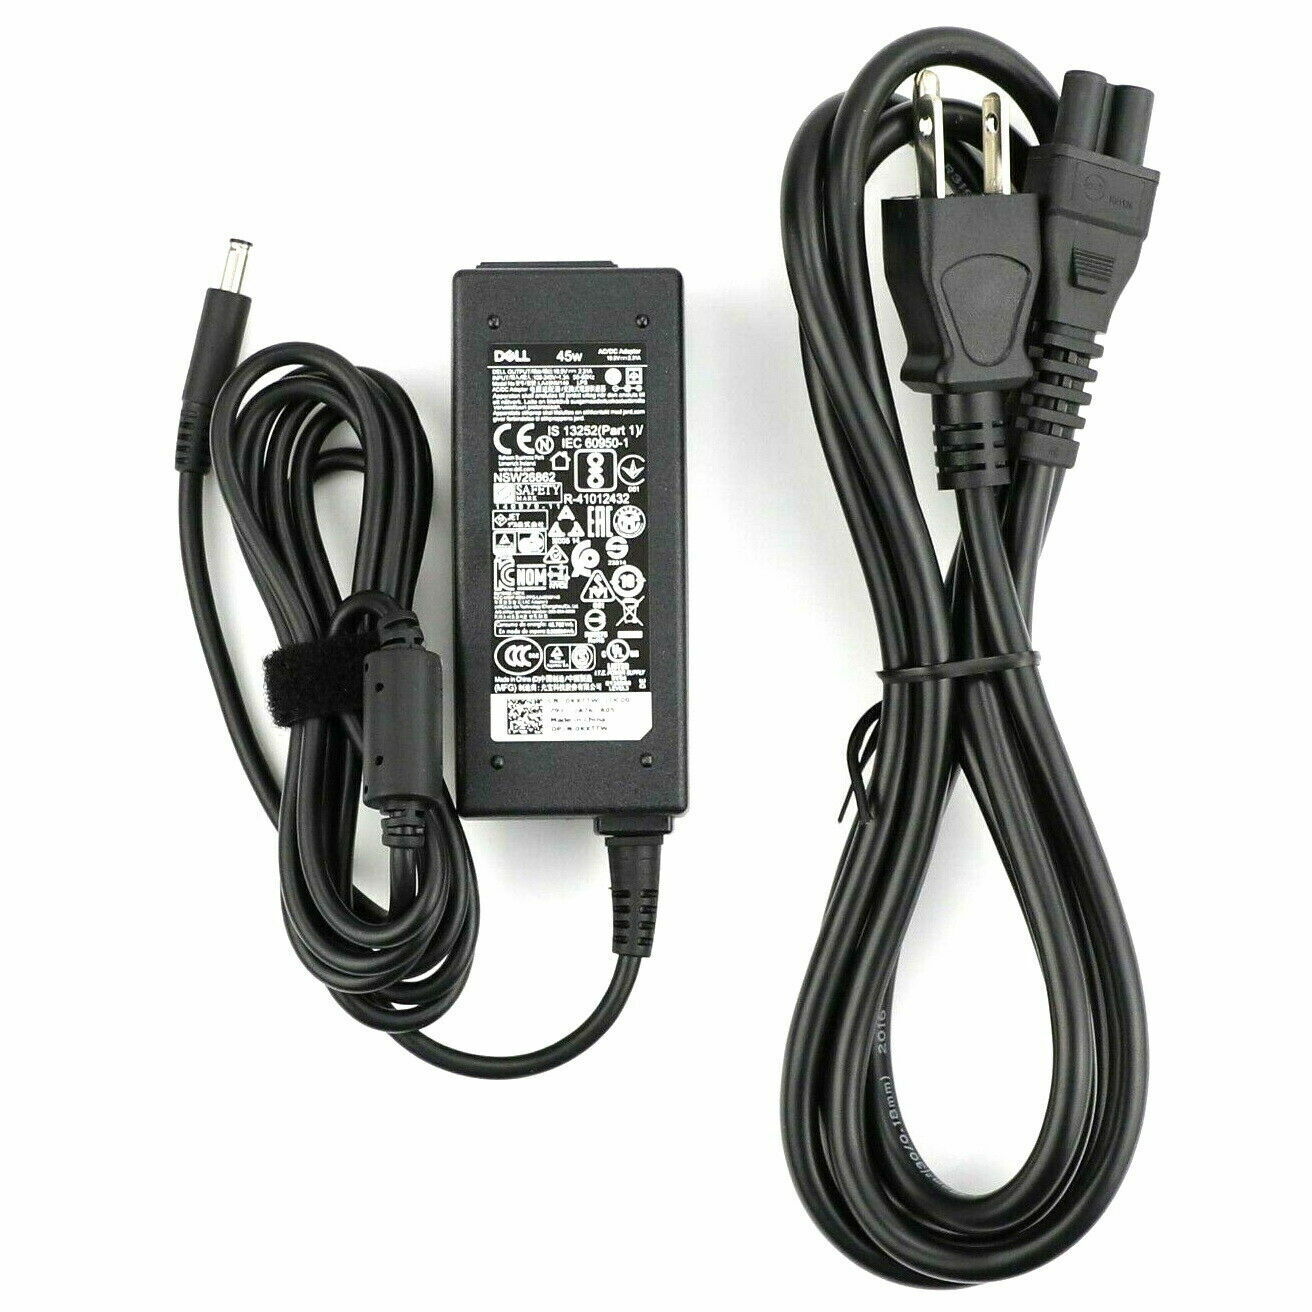 New 45W Genuine Dell AC Adapter Charger for Dell Inspiron 15 3552 3565 3583 w/PC